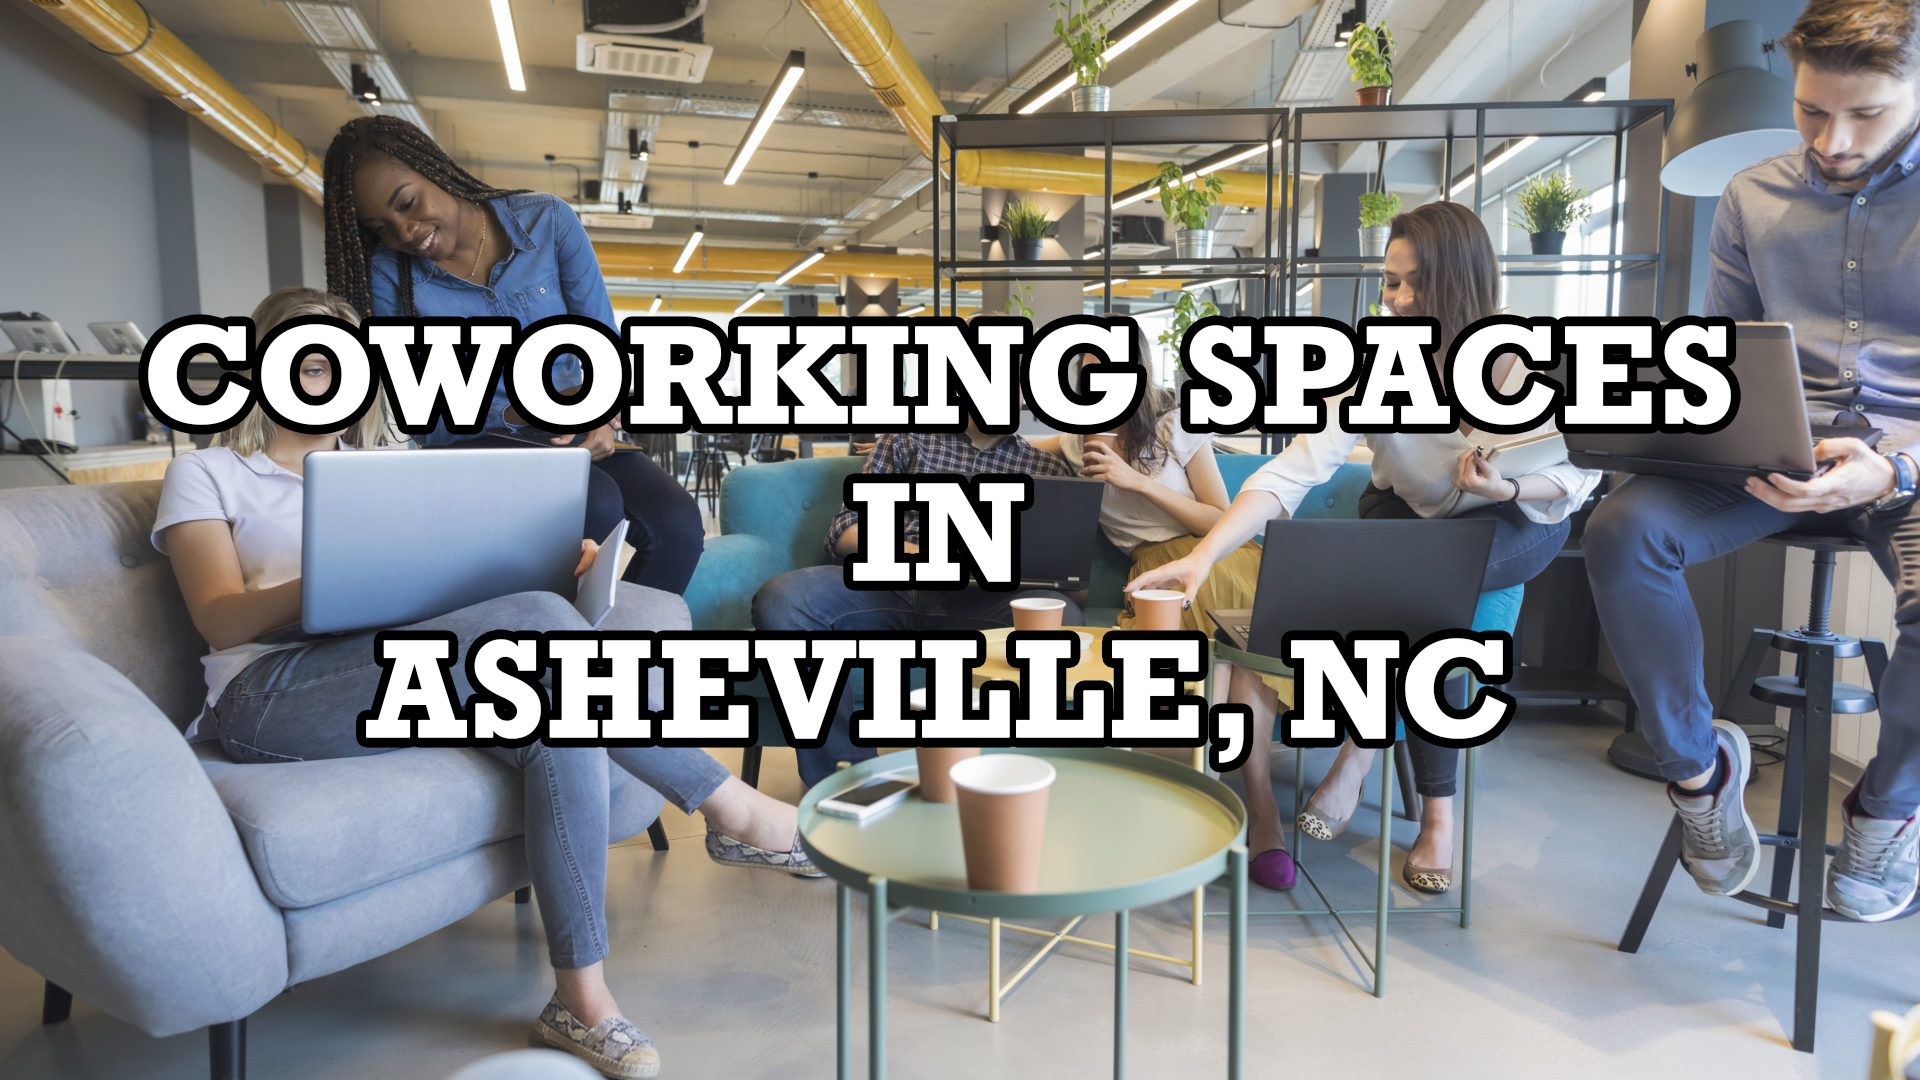 You are currently viewing Asheville Coworking: Has its time come for the Western N.C. market?